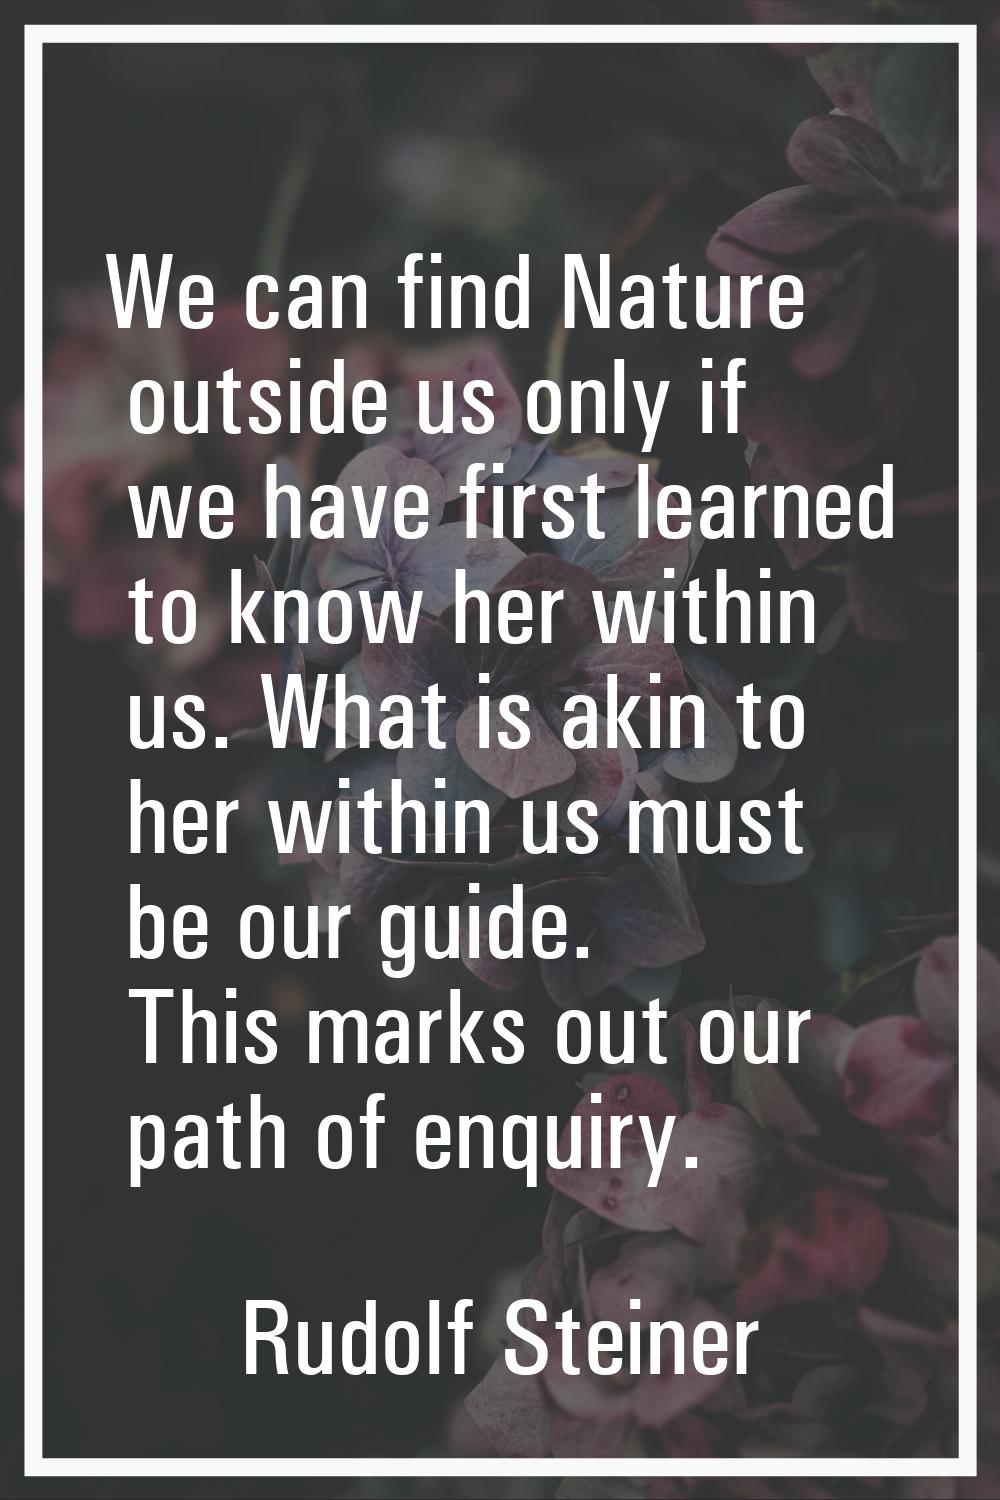 We can find Nature outside us only if we have first learned to know her within us. What is akin to 